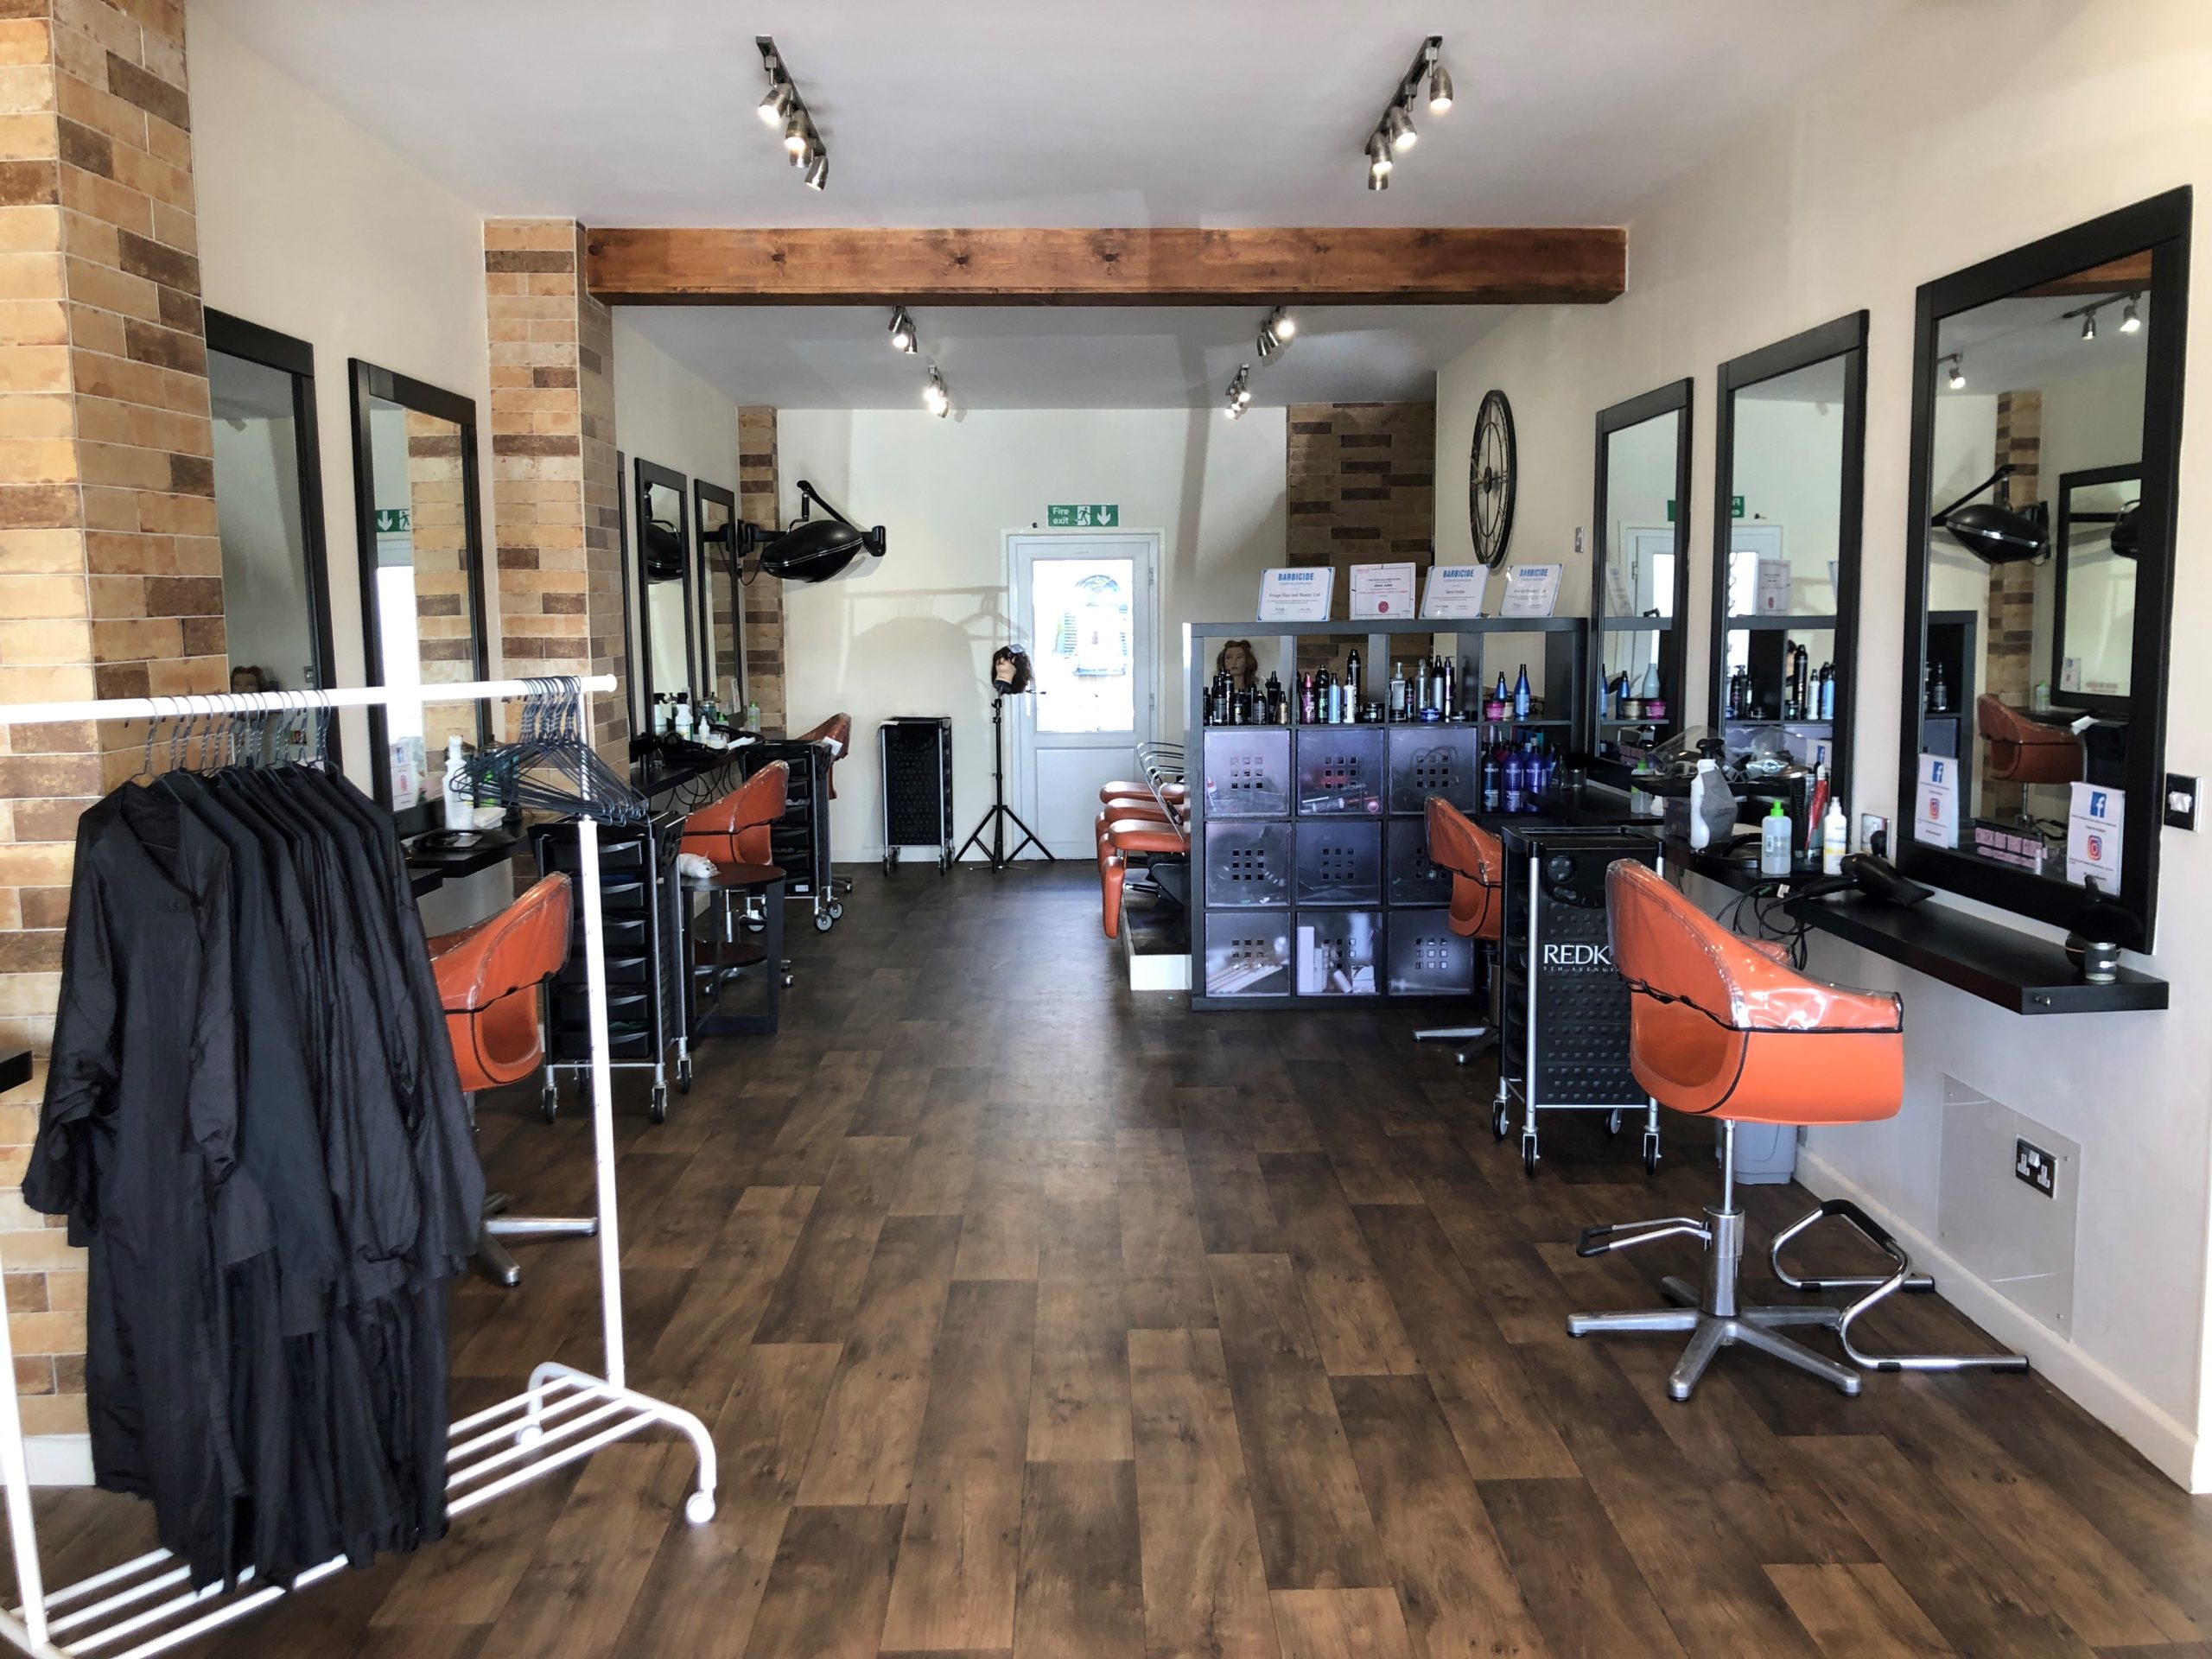 Our stylists are ready for your appointment